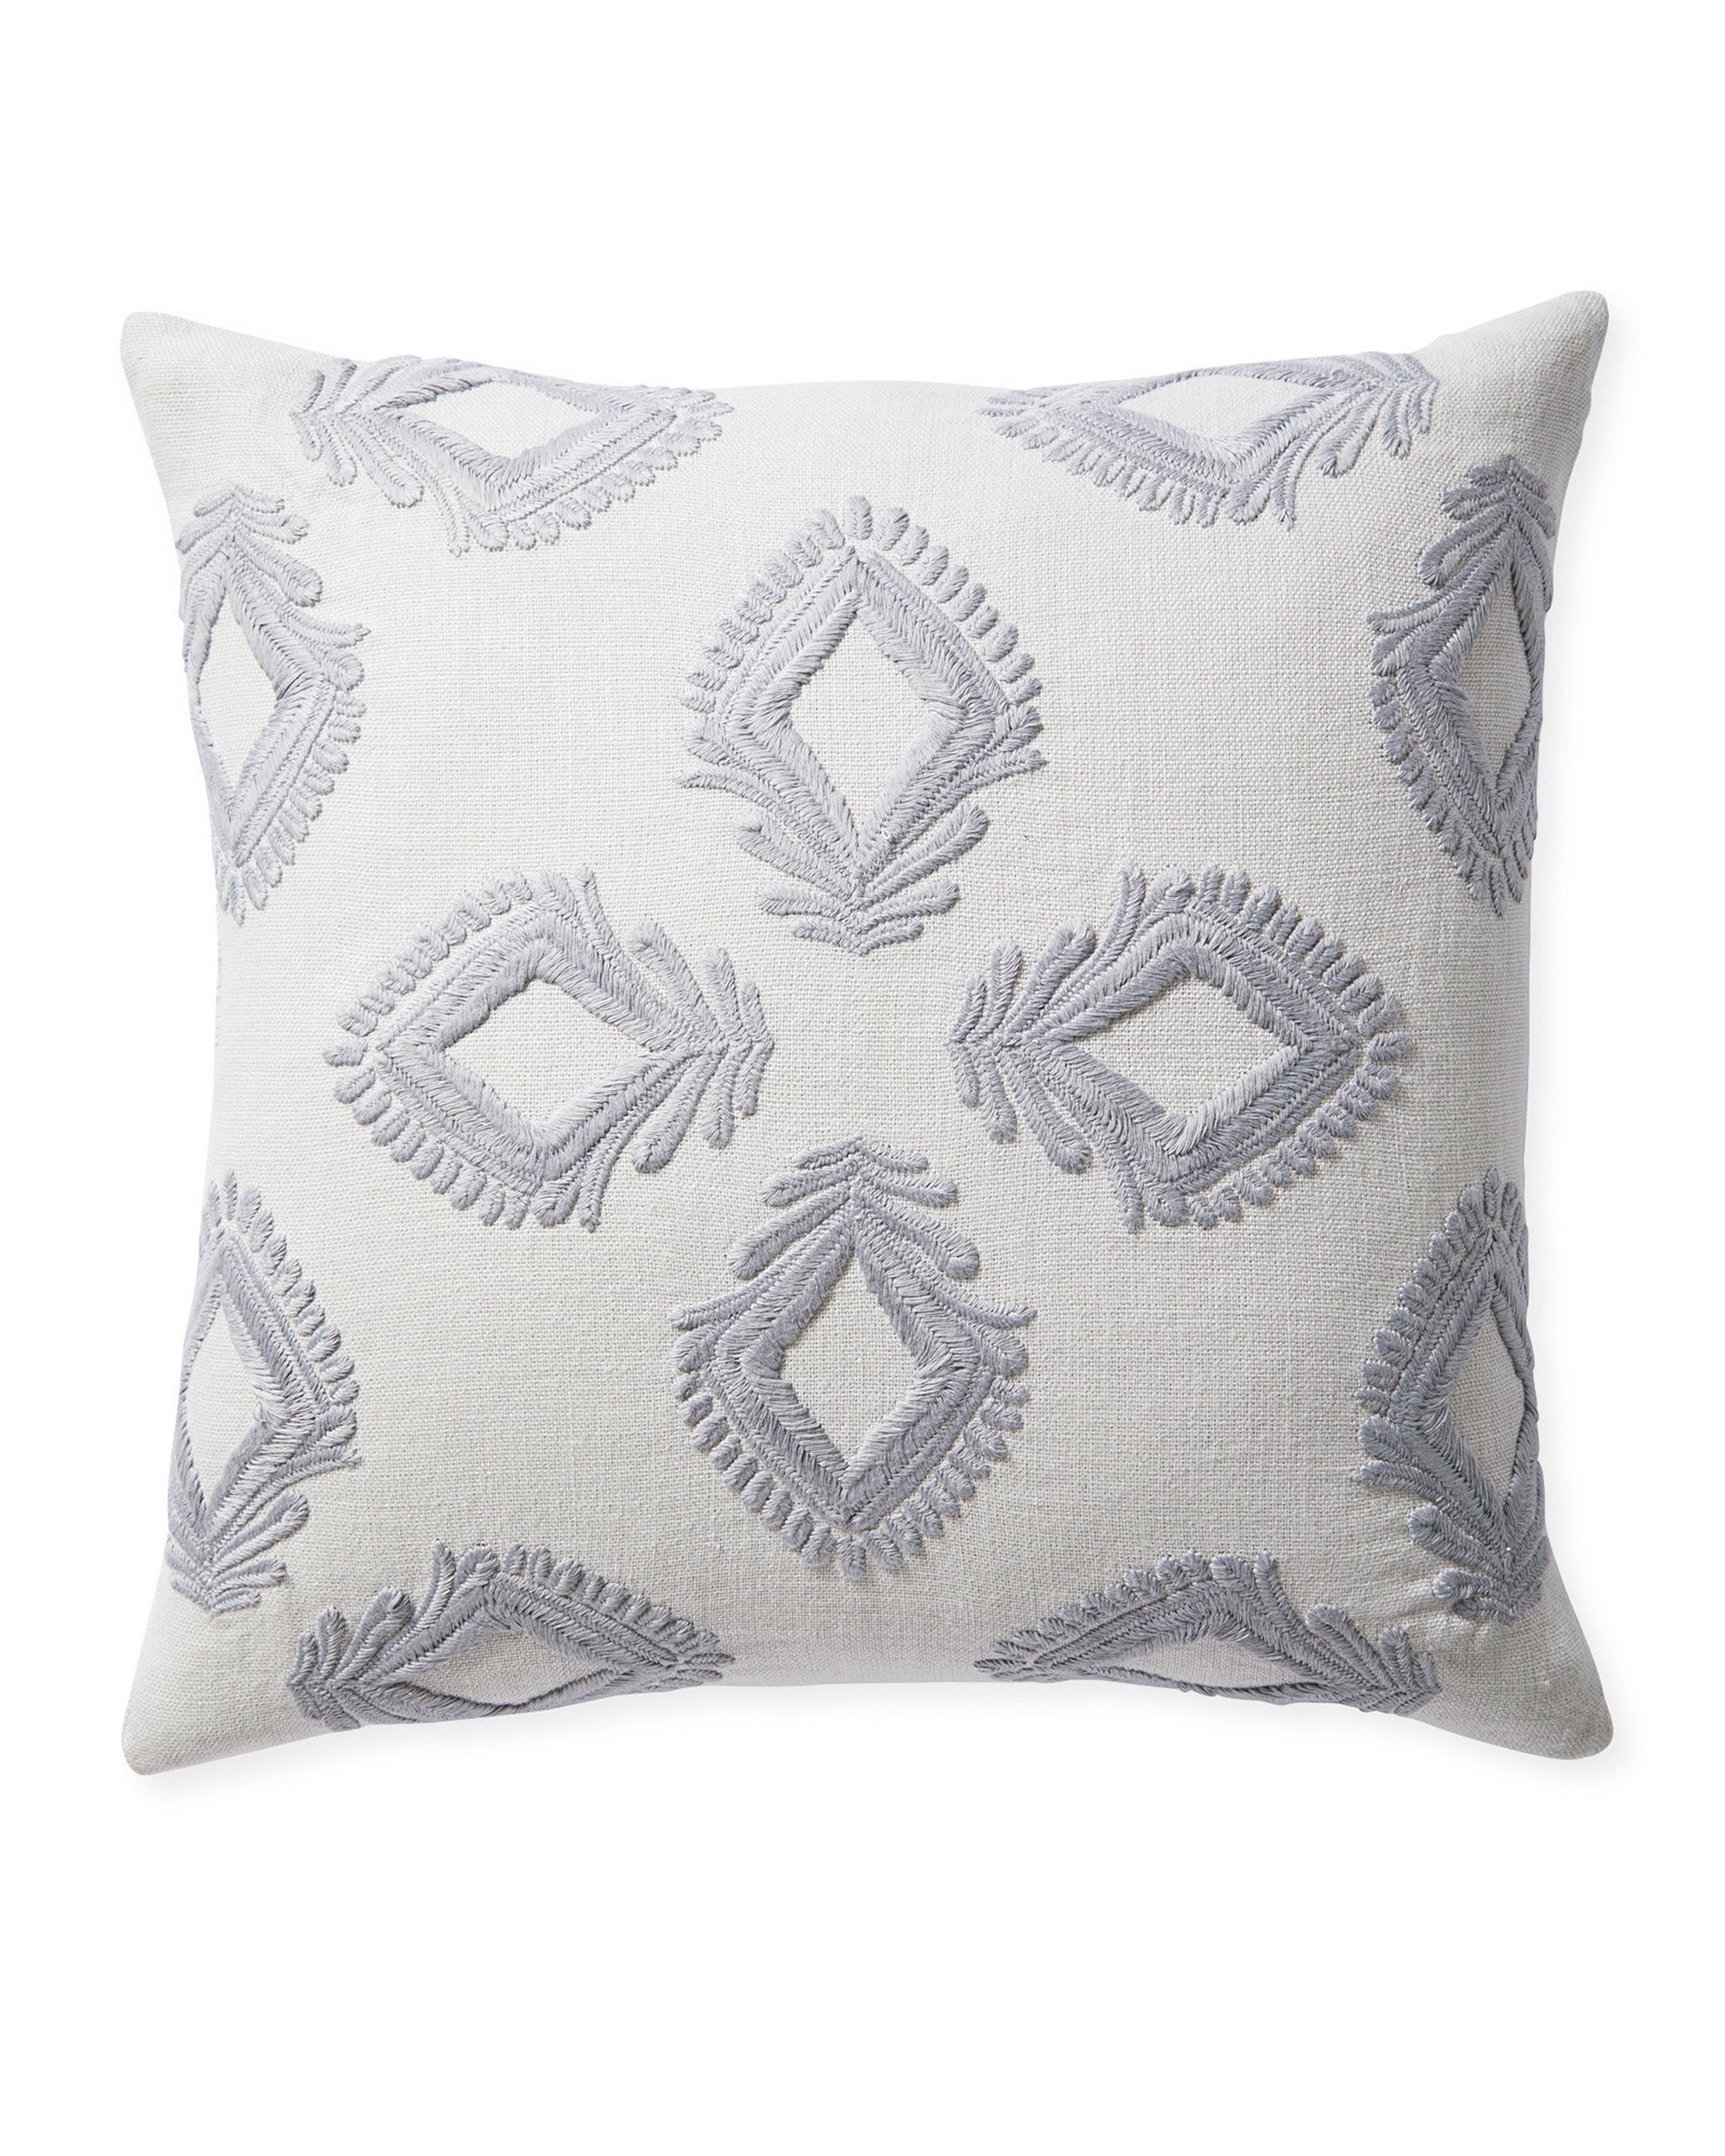 Leighton Pillow Cover - White - 24" x 24"- Insert sold separately - Serena and Lily